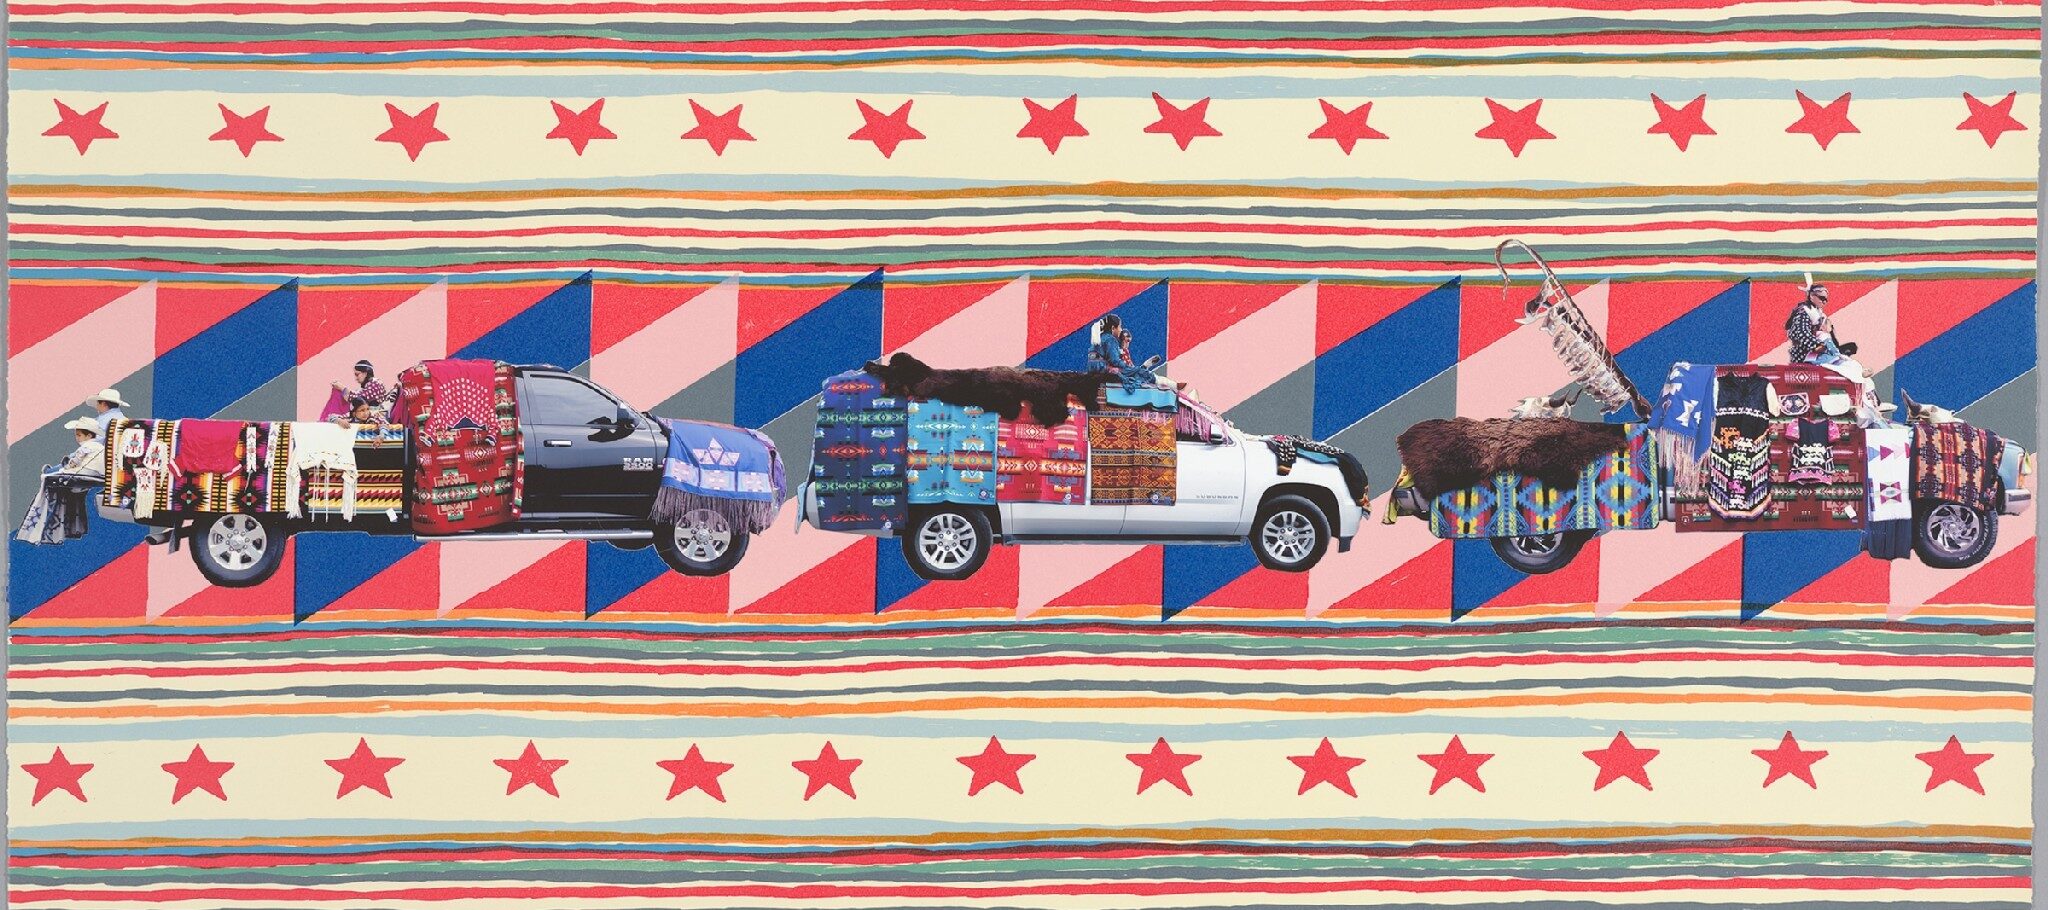 This colorful collage/print features cut-out photographs of three pickup trucks covered in vibrant, geometric-patterned, Native American blankets atop a blue, pink, and red geometric background. A few men and women populate the vehicles, some sitting on the back bumper, others on the roof. Above and below this segment are alternating layers of green, red, and orange stripes, and red stars on a muted yellow background.